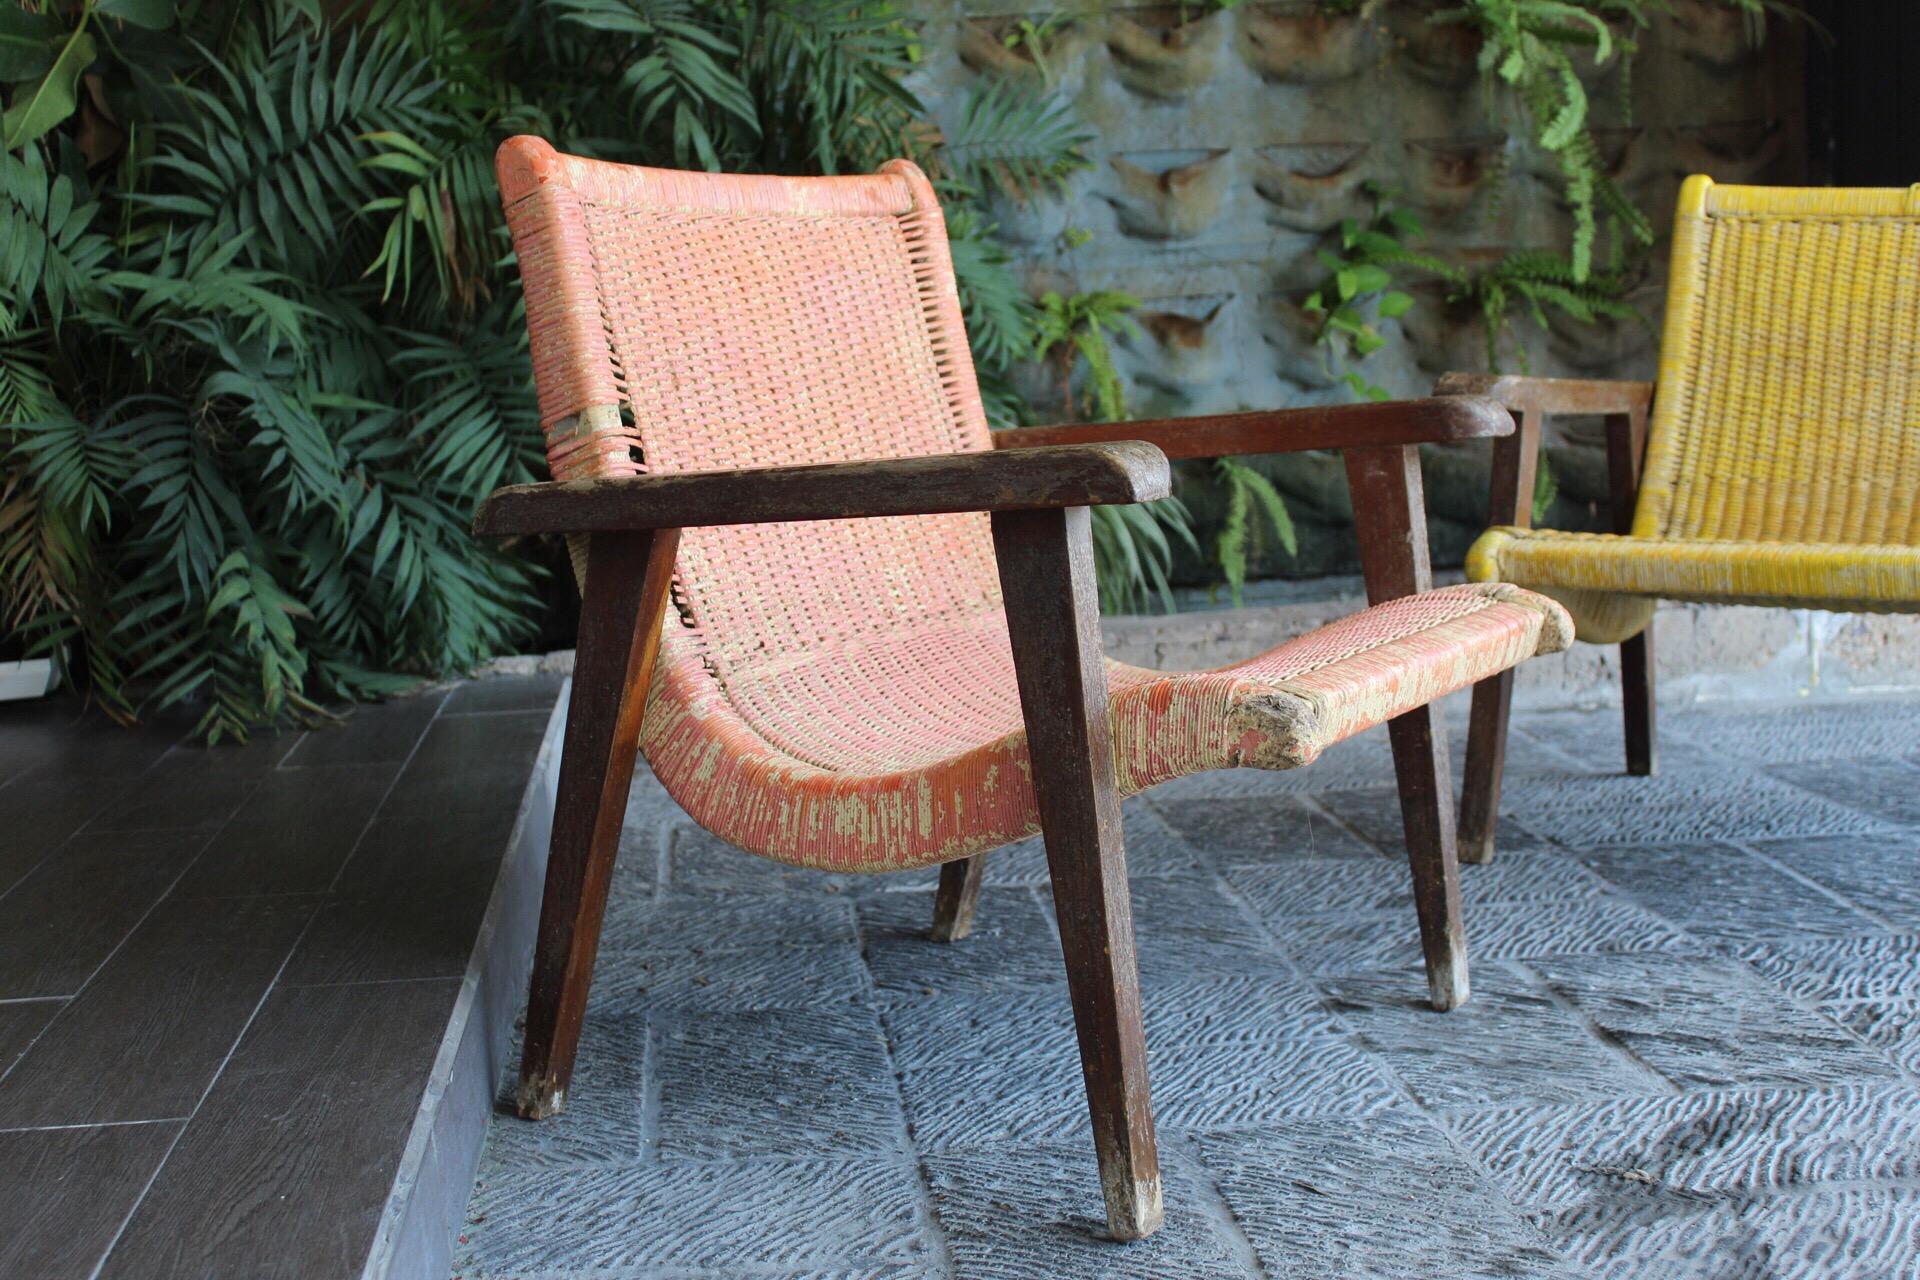 Wonderful set of two San Miguelito armchairs attributed to Michael van Beuren and Domus, this is a great opportunity to have in your space an important part of the Mexican modernism. These jewels we decided not to restore them in order to preserve